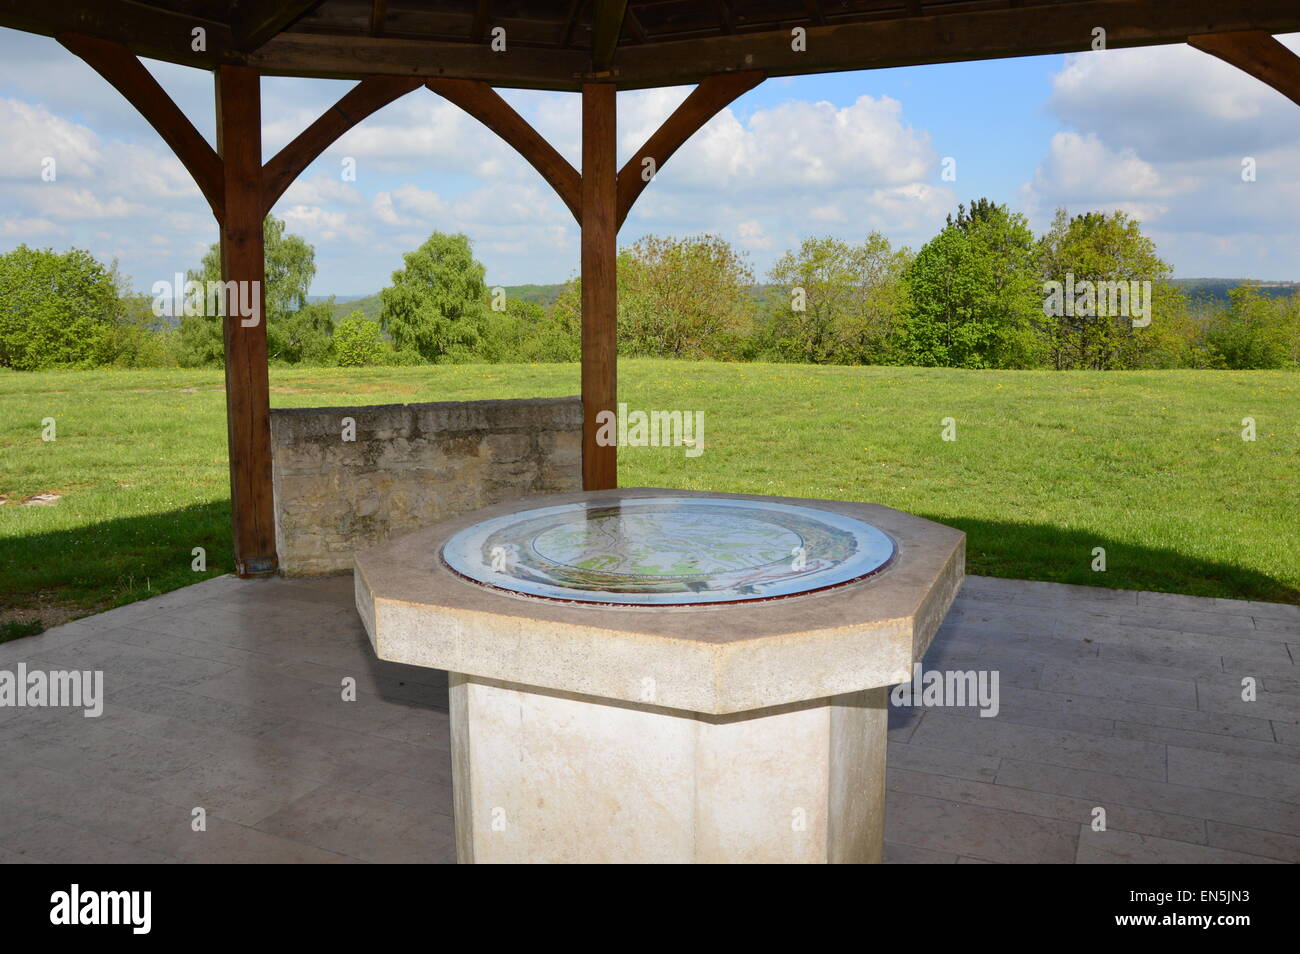 A viewpoint over a famous site Stock Photo